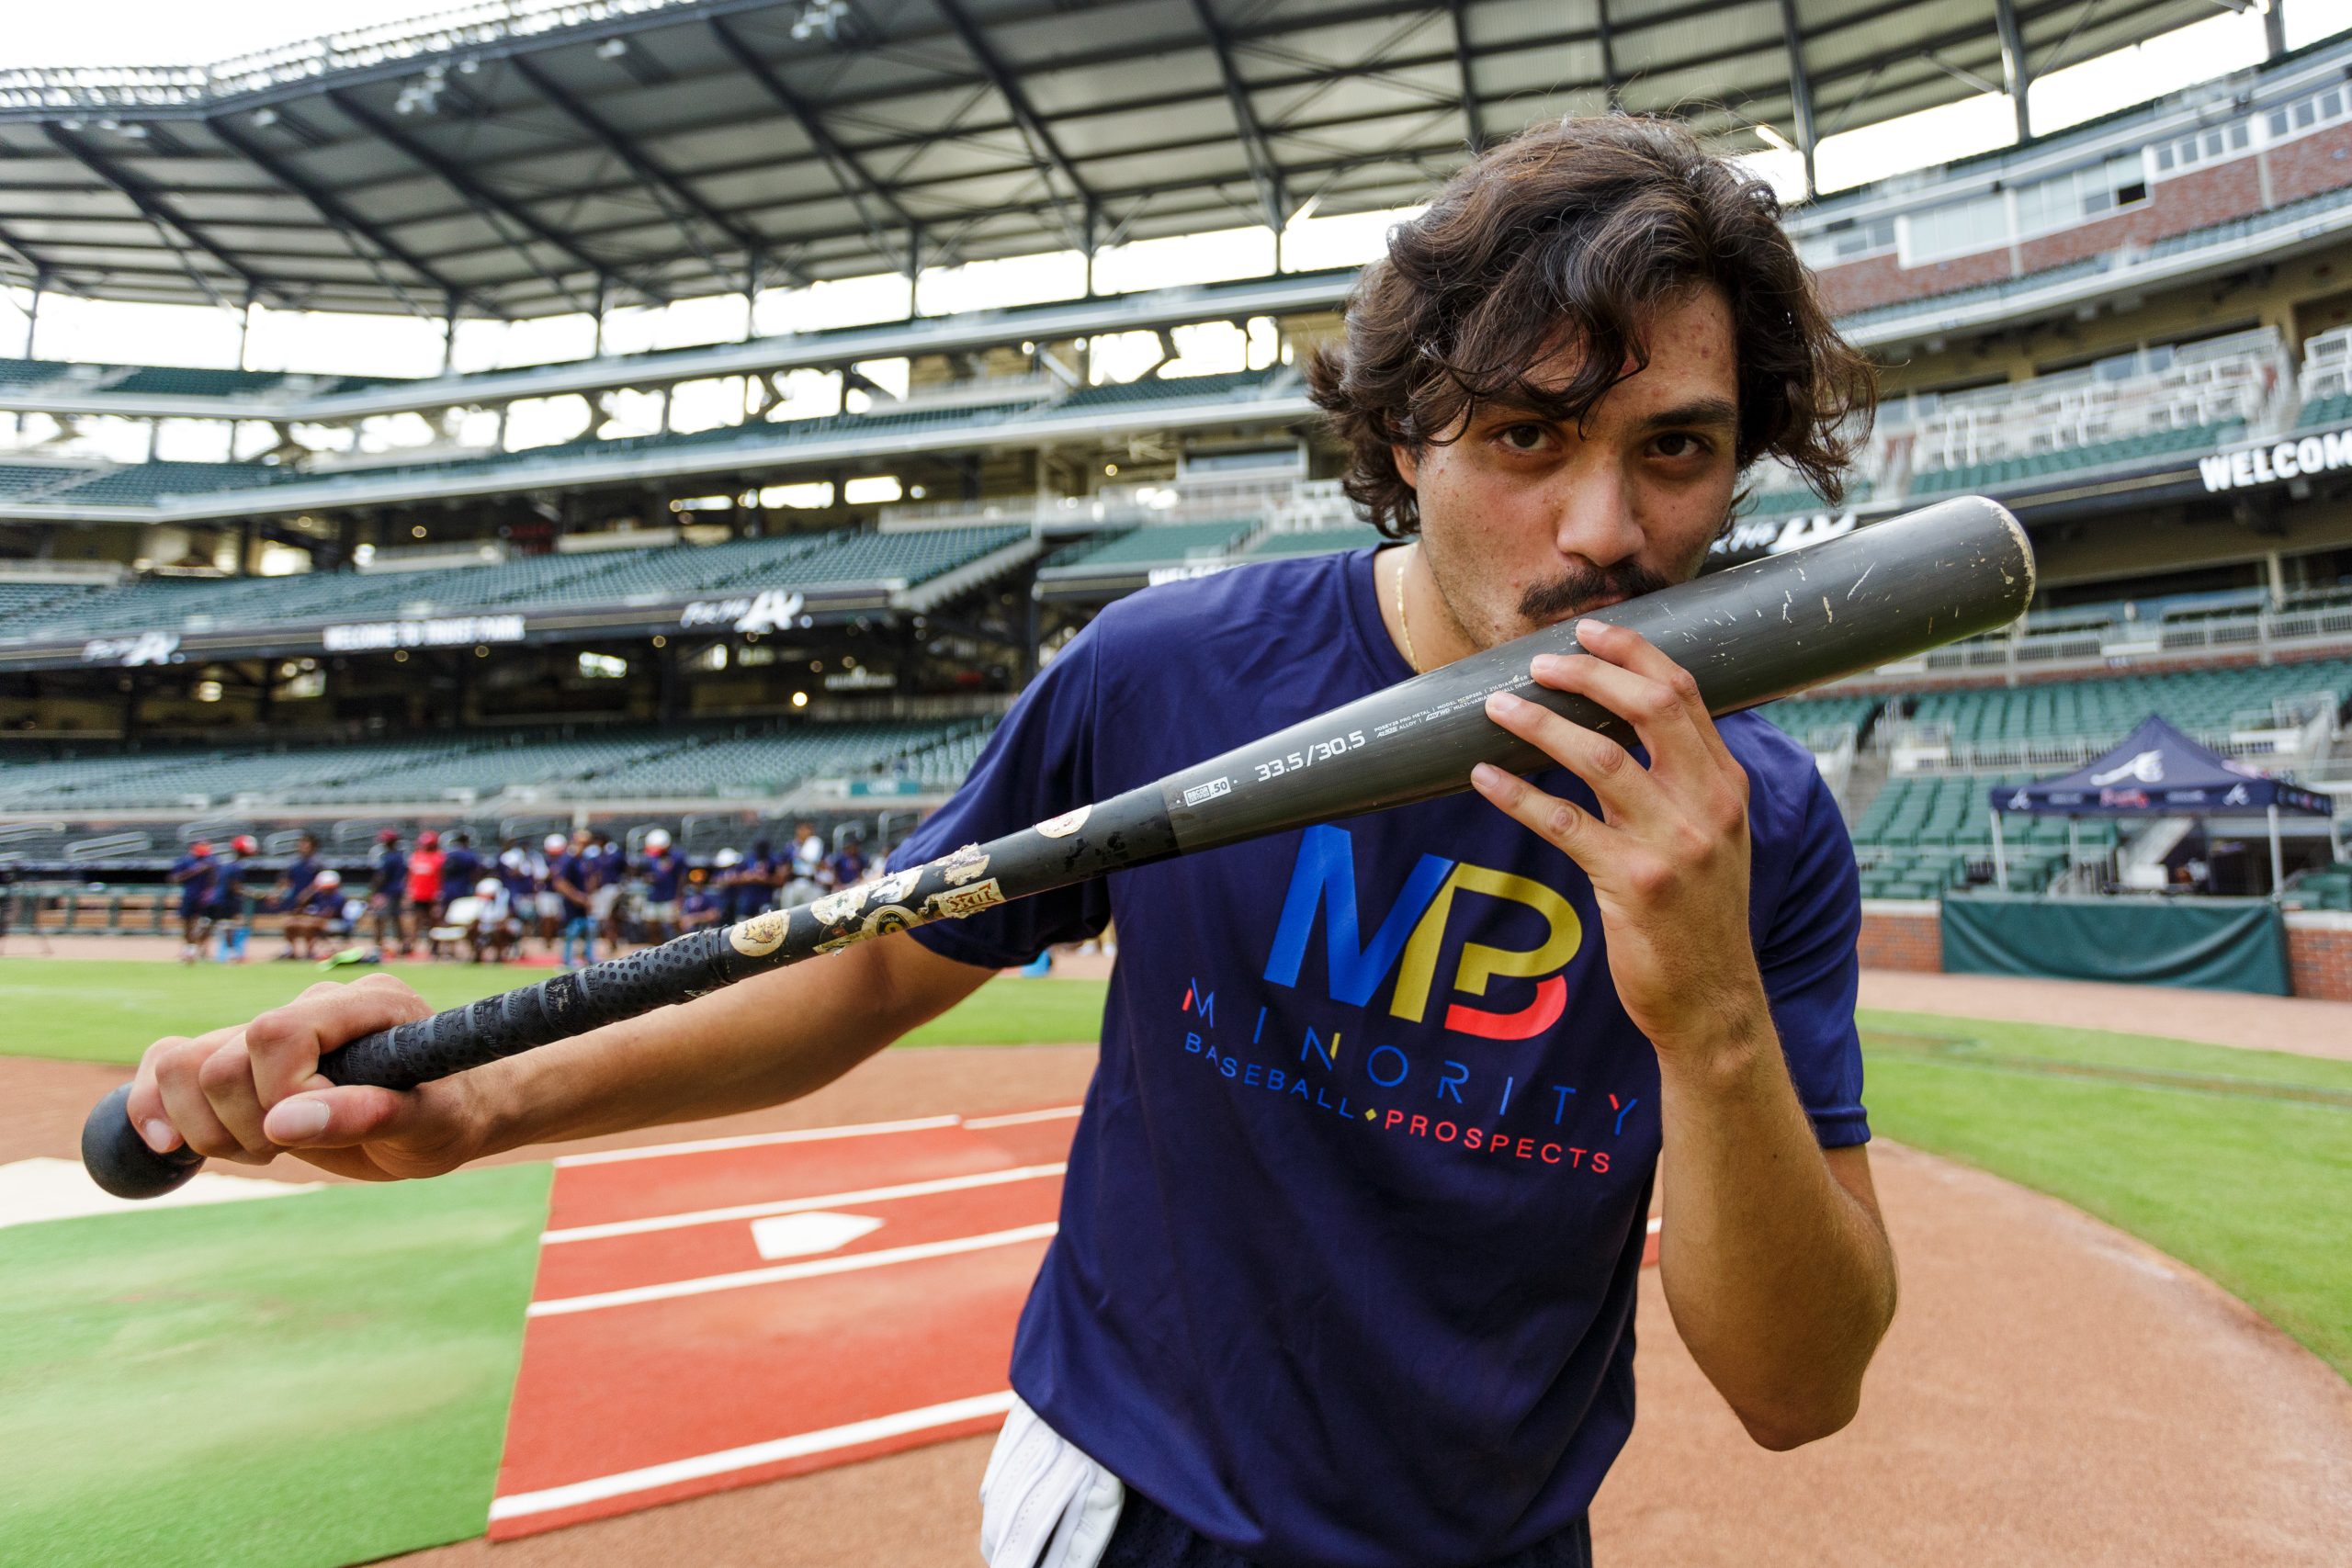 Scenes from the Minority Baseball Prospects 2022 Home Run Derby. Photo by Matthew Grimes